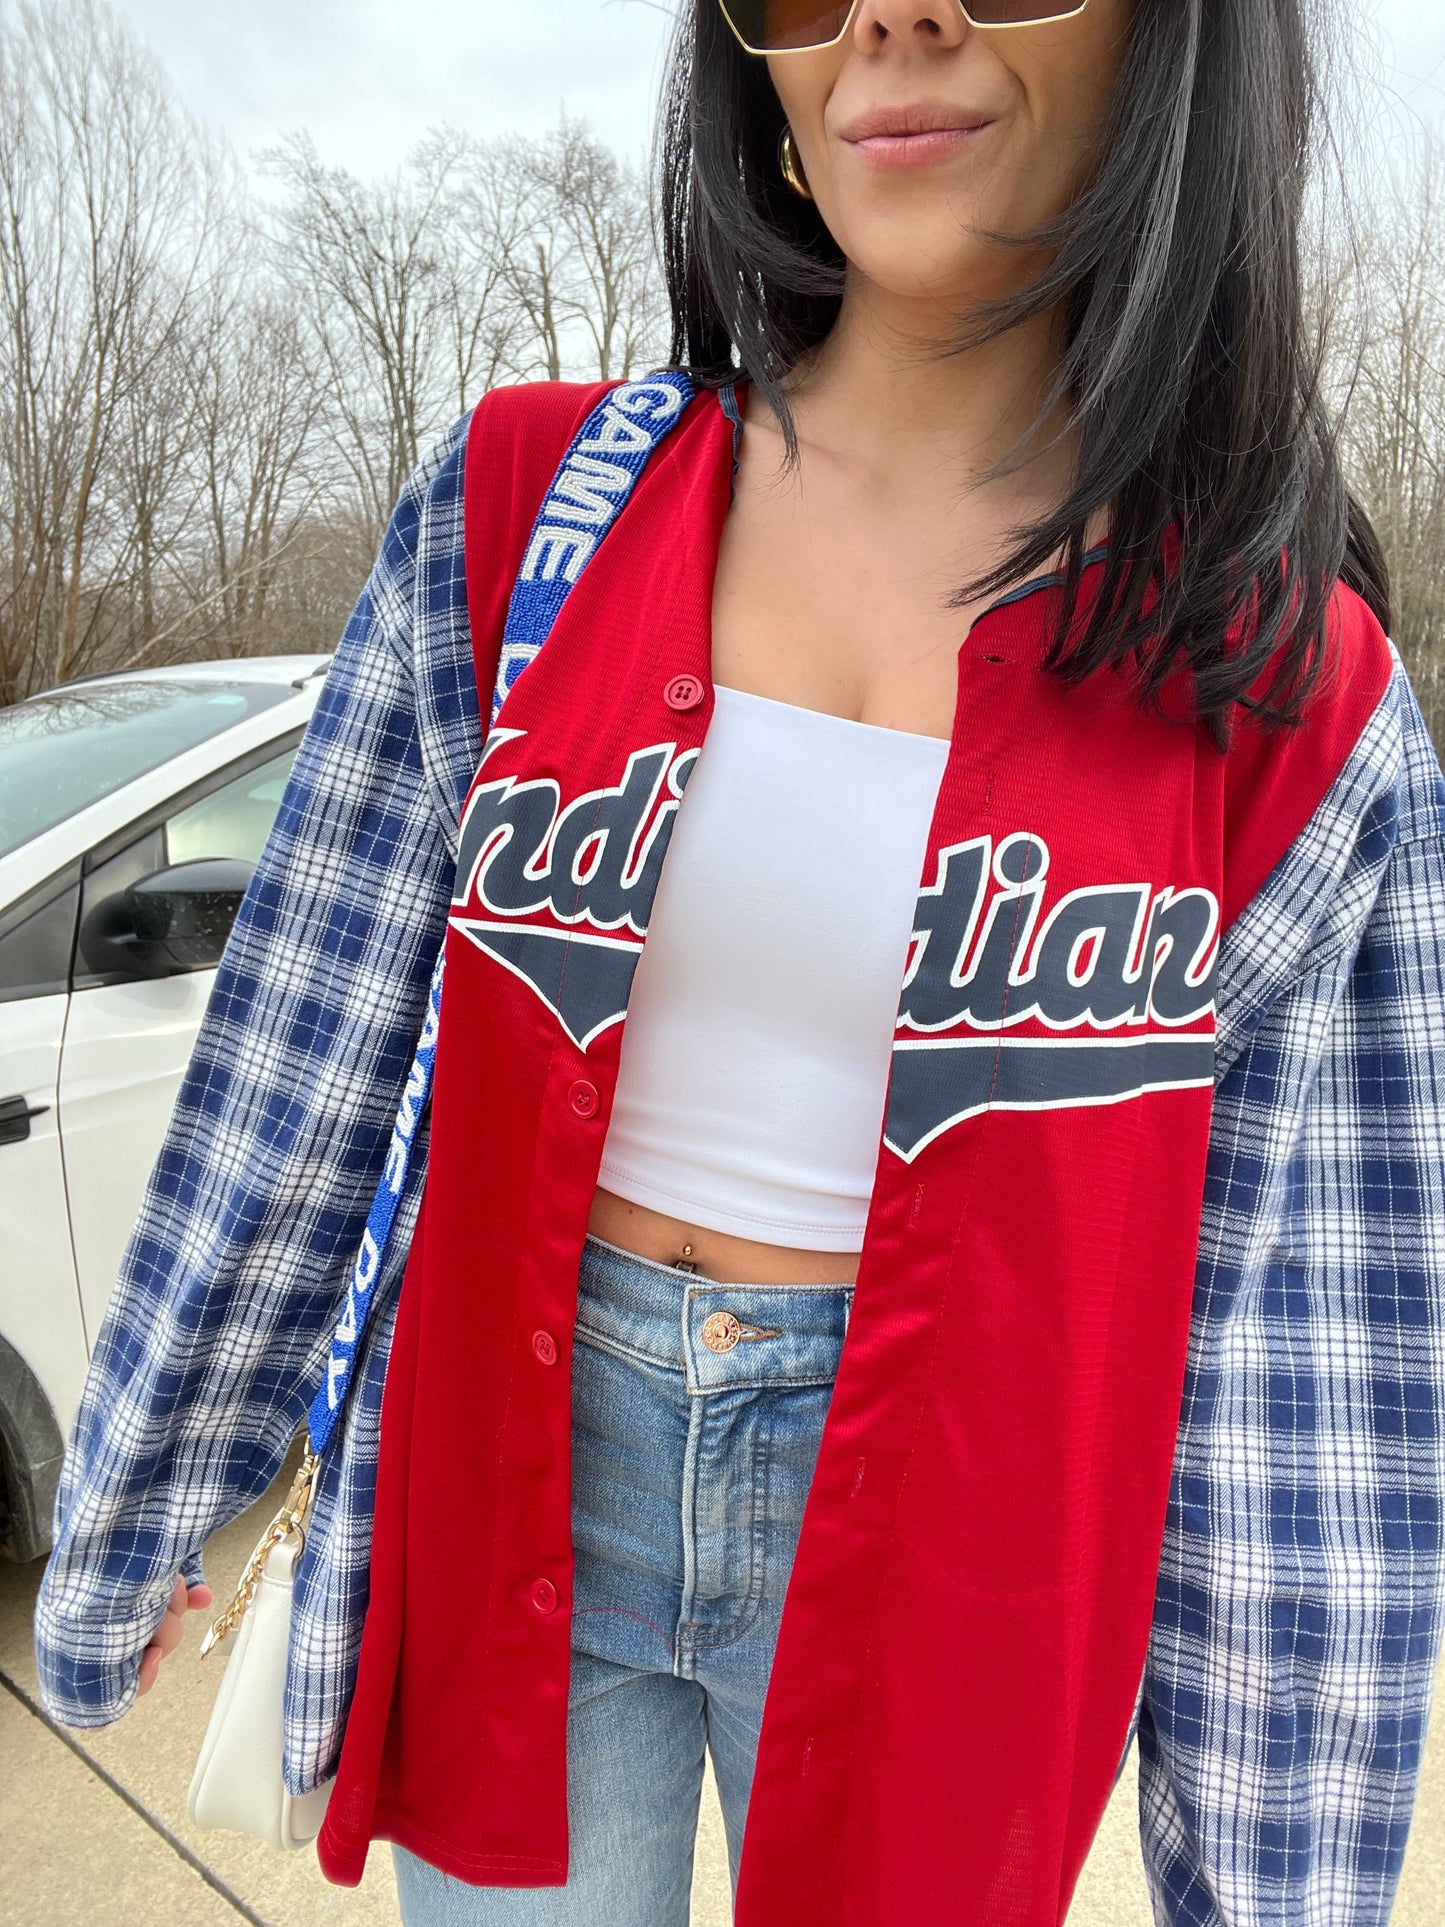 CLEVELAND CLEVINGER JERSEY X FLANNEL